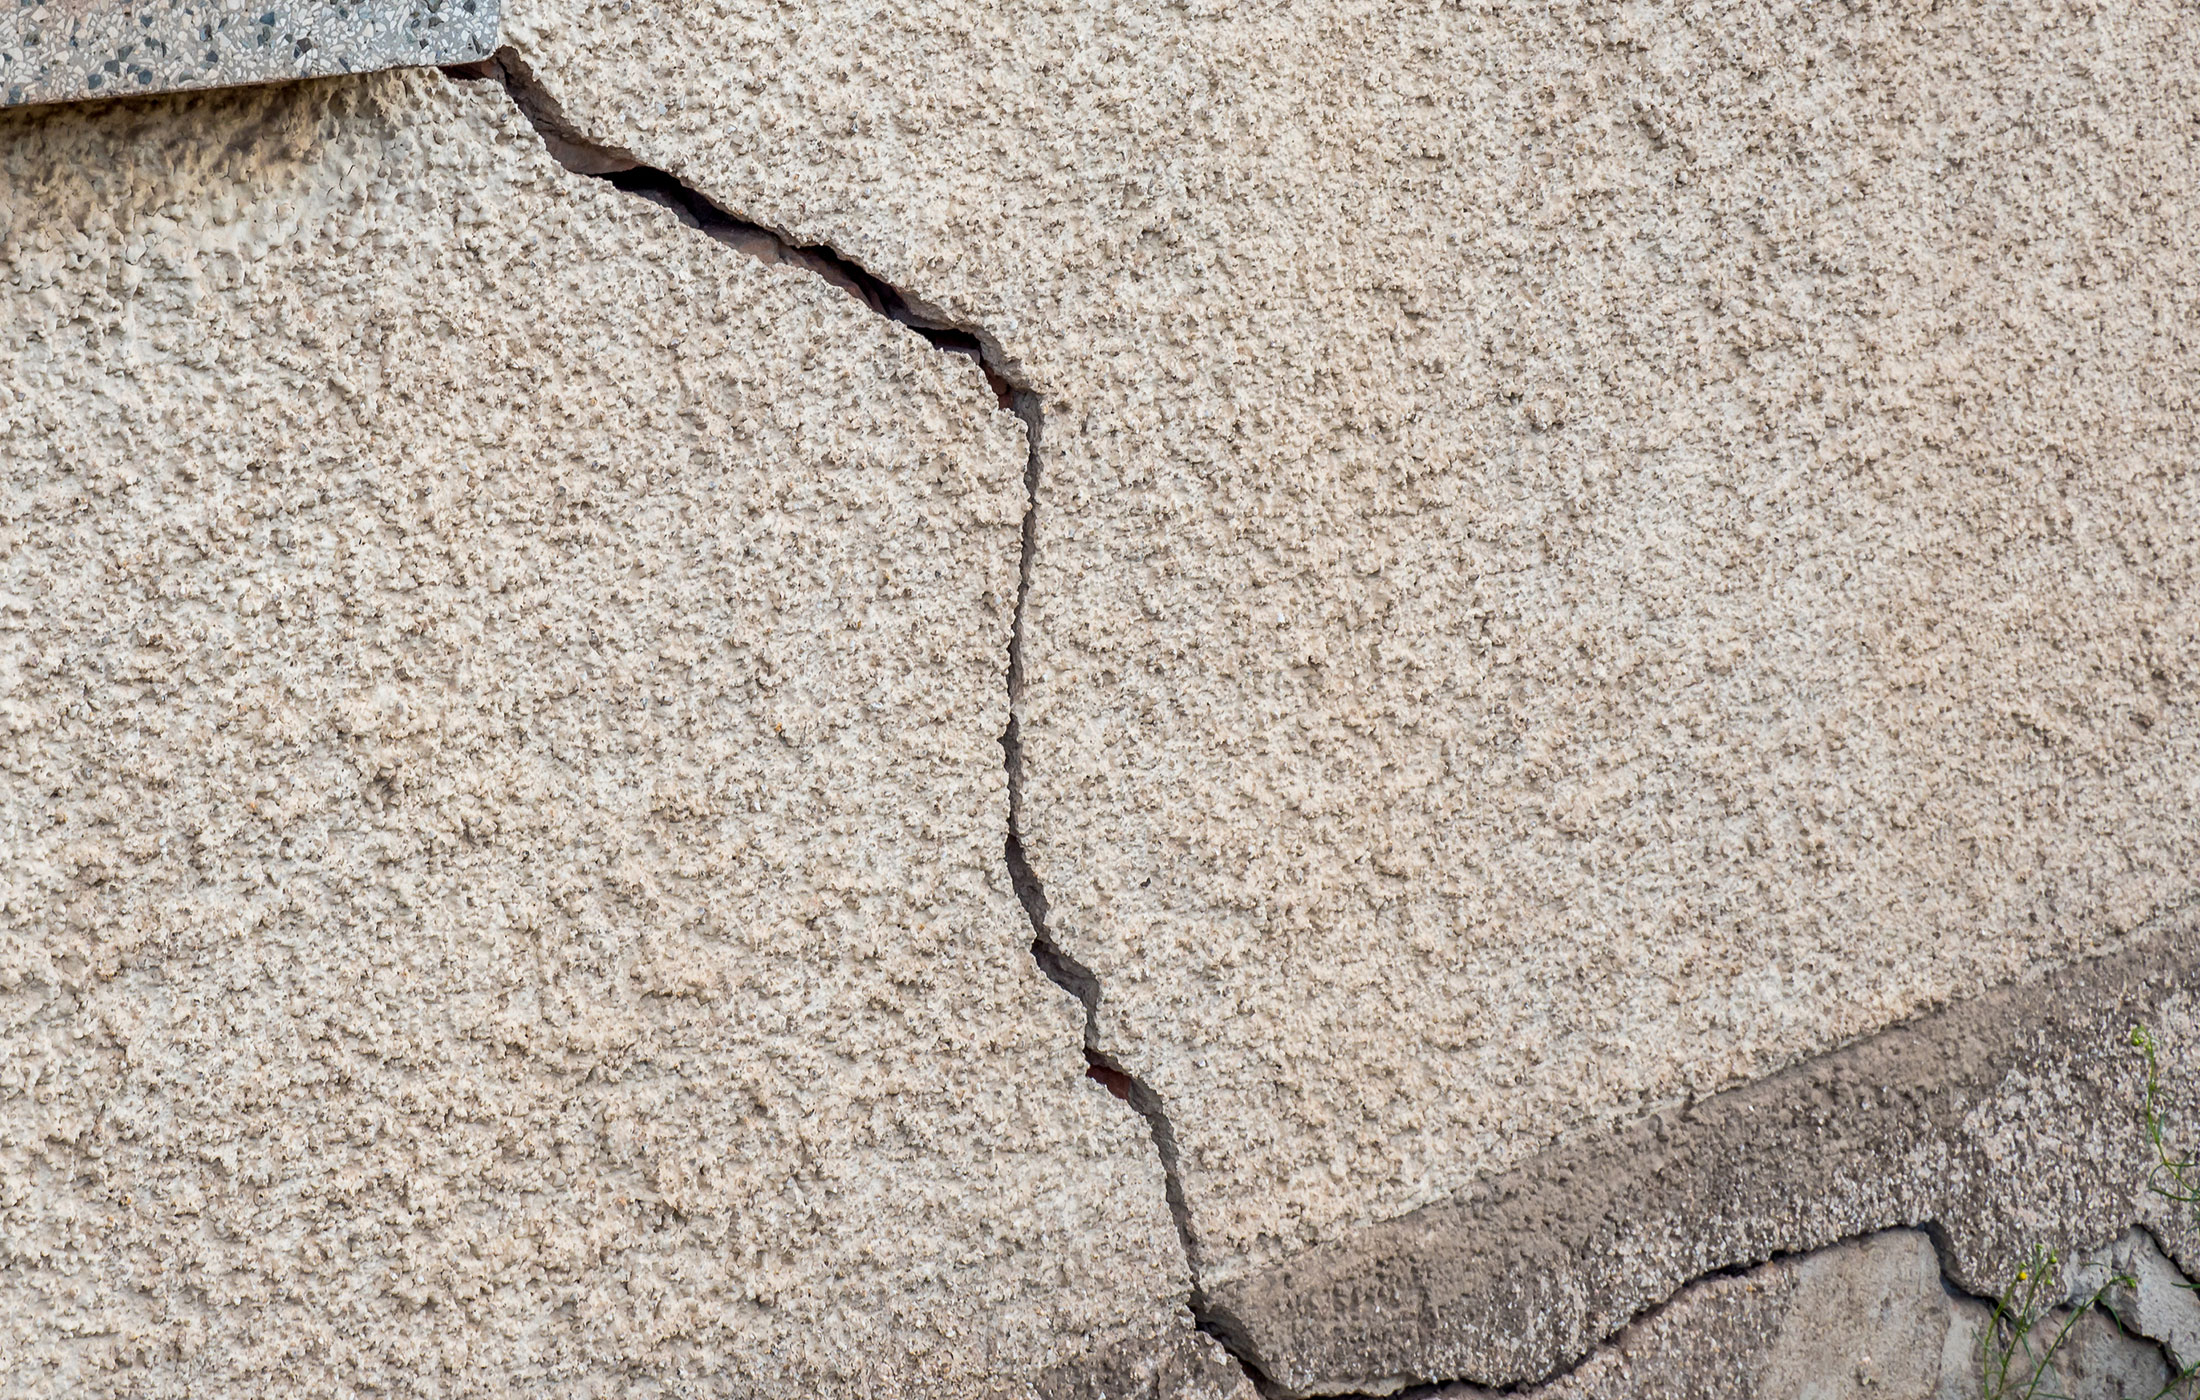 Monitoring and Addressing Cracks in Your Foundation